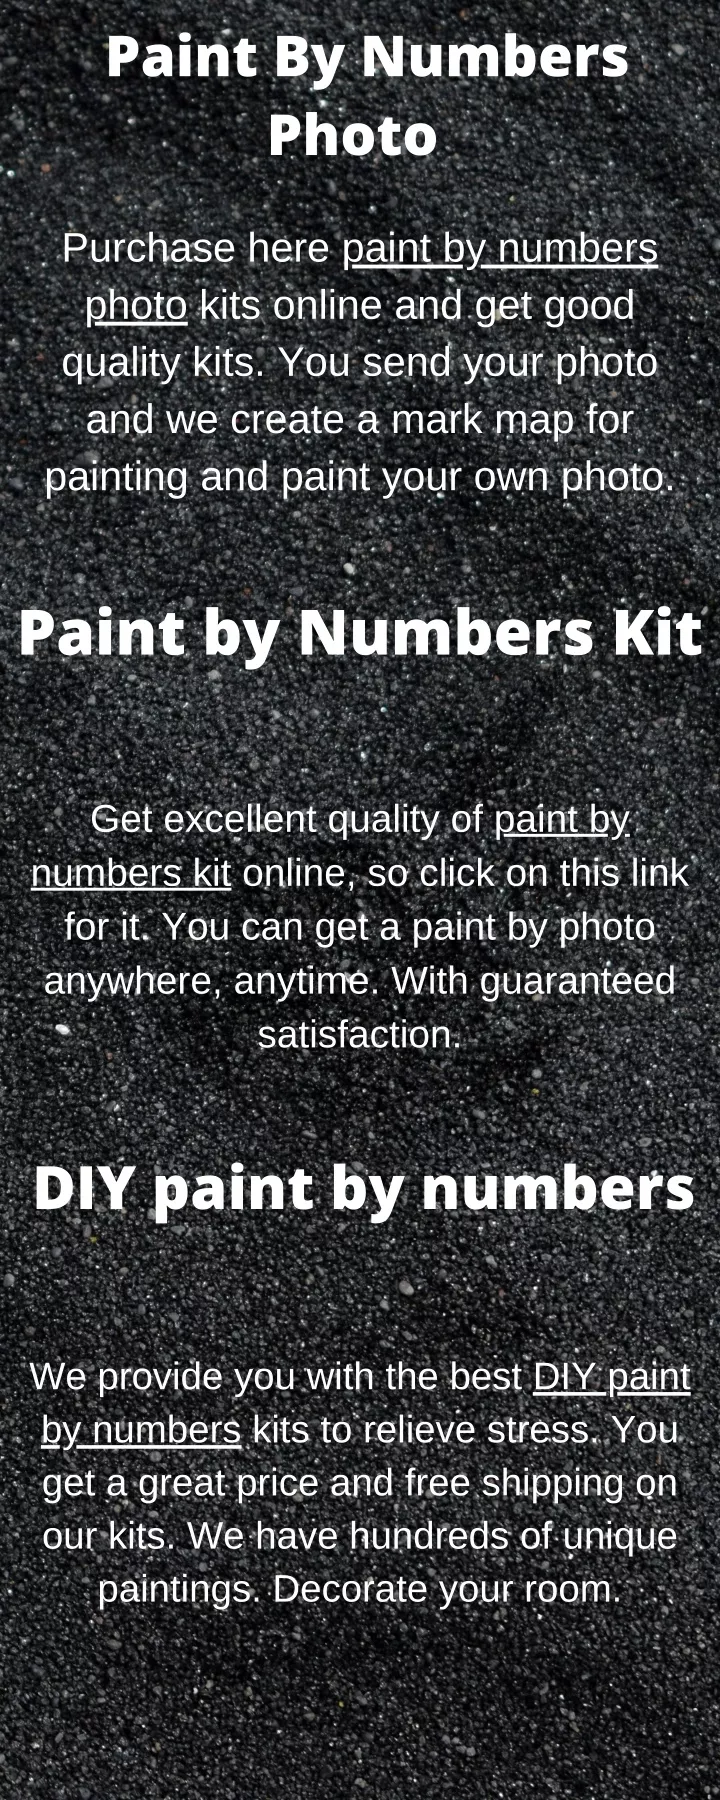 paint by numbers photo